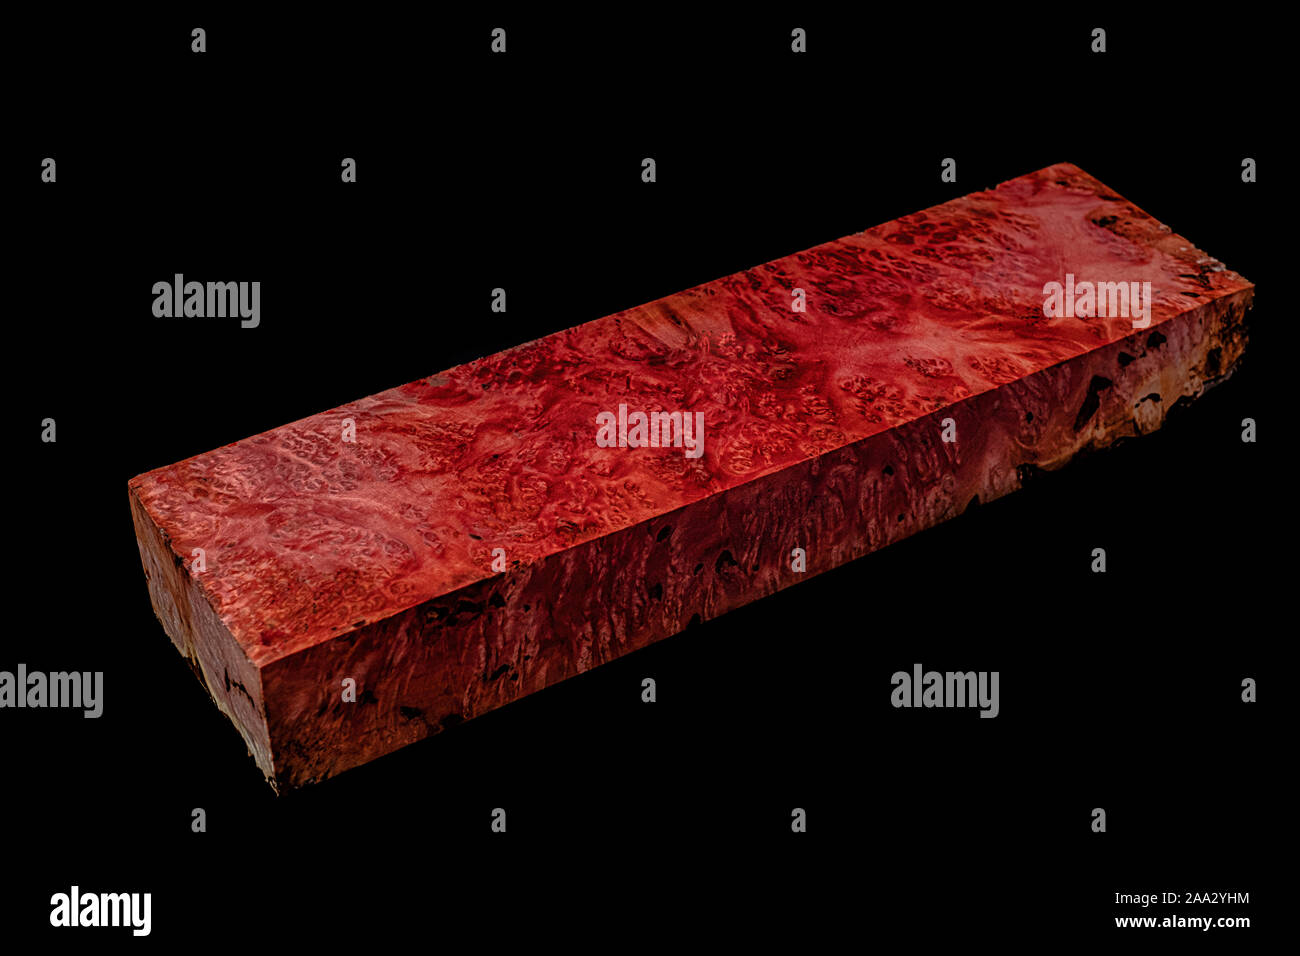 Logs Marfan burl wood striped exotic wooden beautiful pattern for crafts at black background Stock Photo